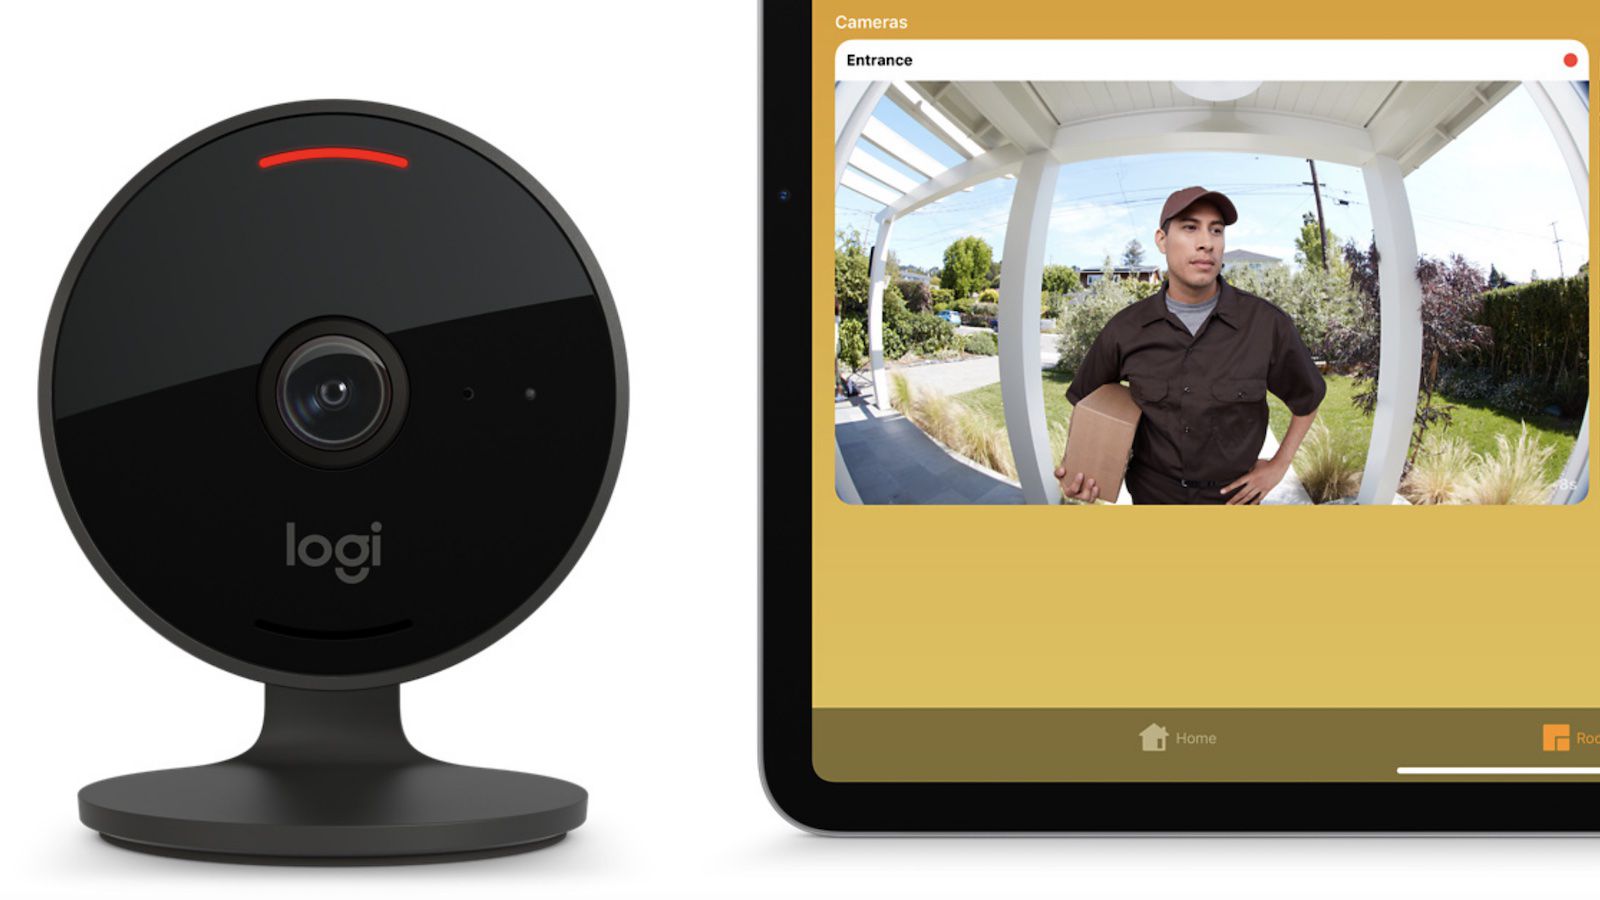 Gewend Melodrama Knorrig Security Camera Snapshots in Home App Failing to Refresh for Some Users -  MacRumors